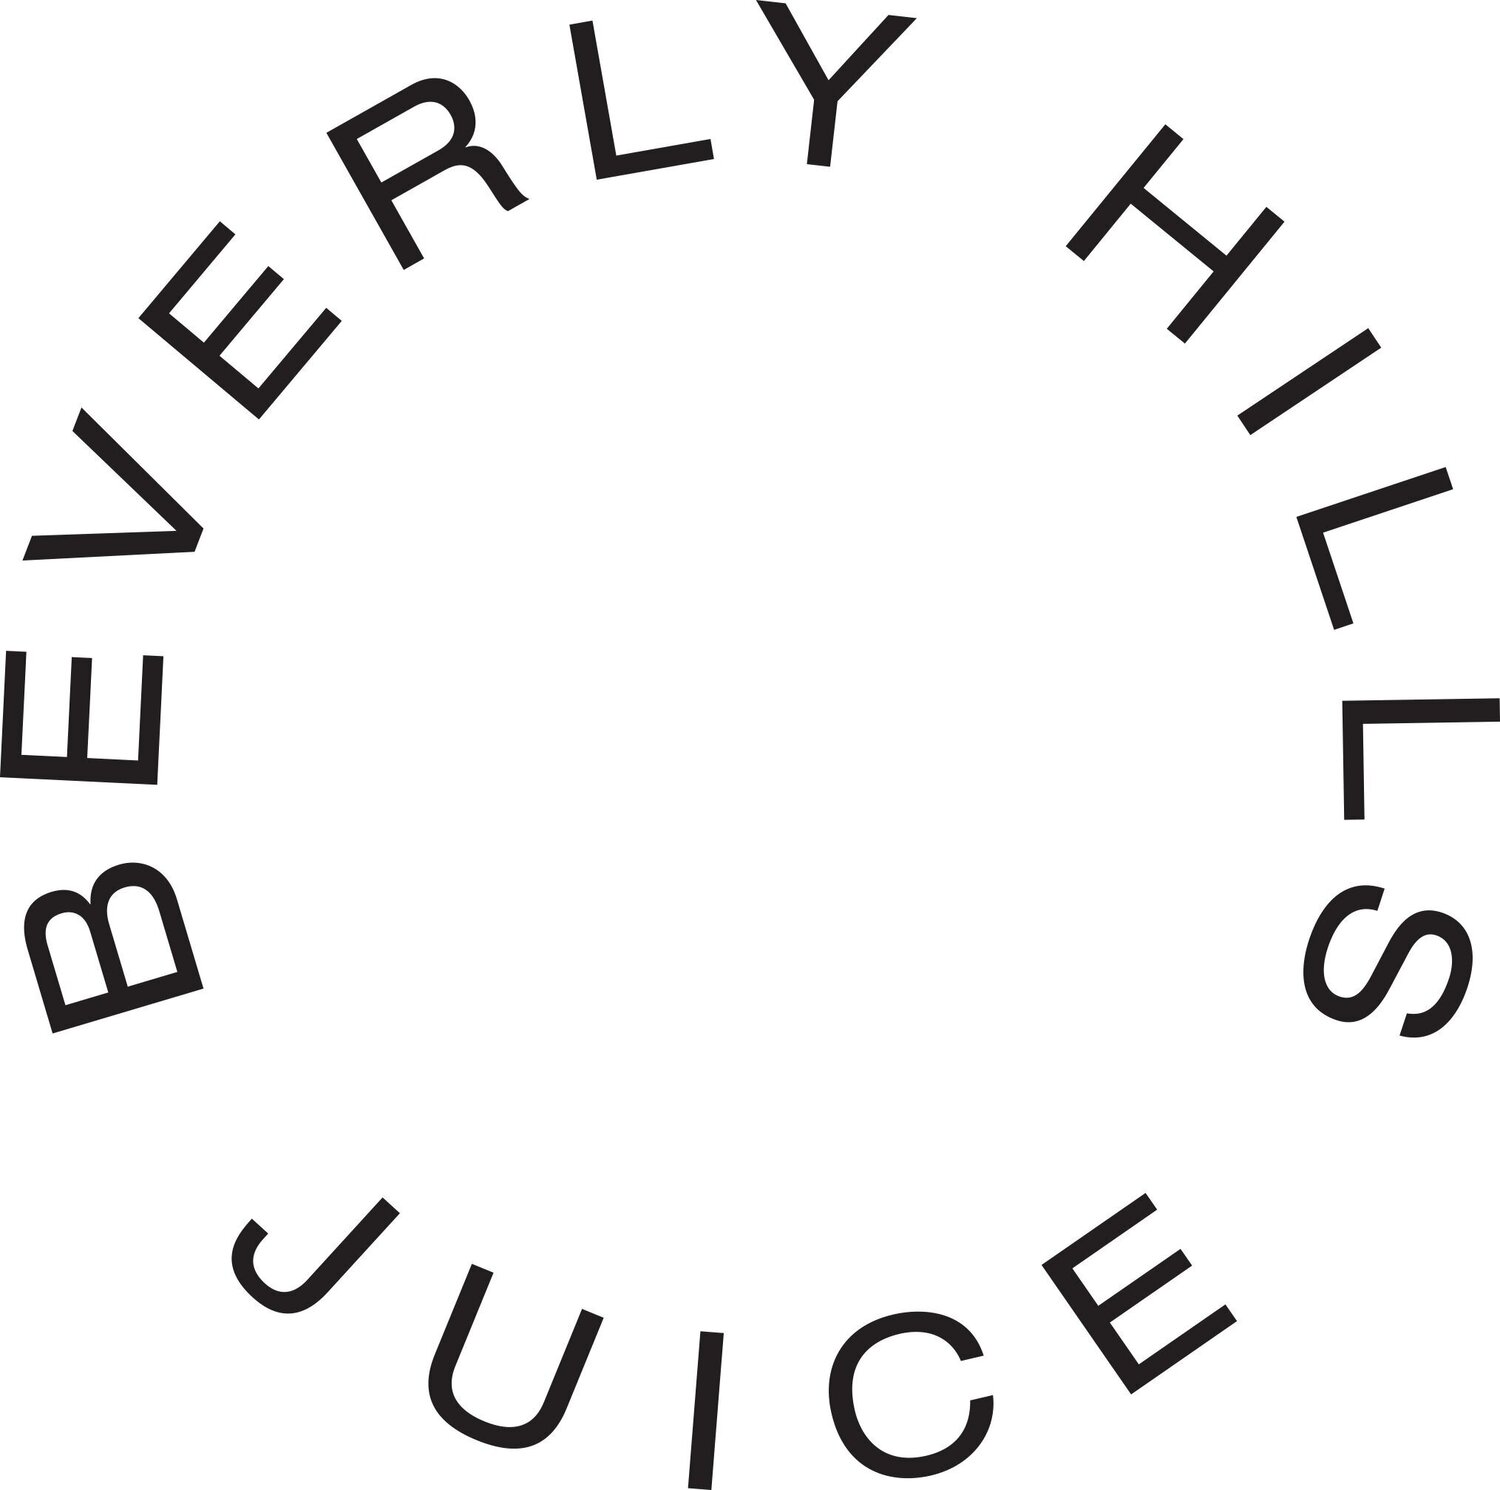 Beverly Hills Juice. Raw Since 1975.